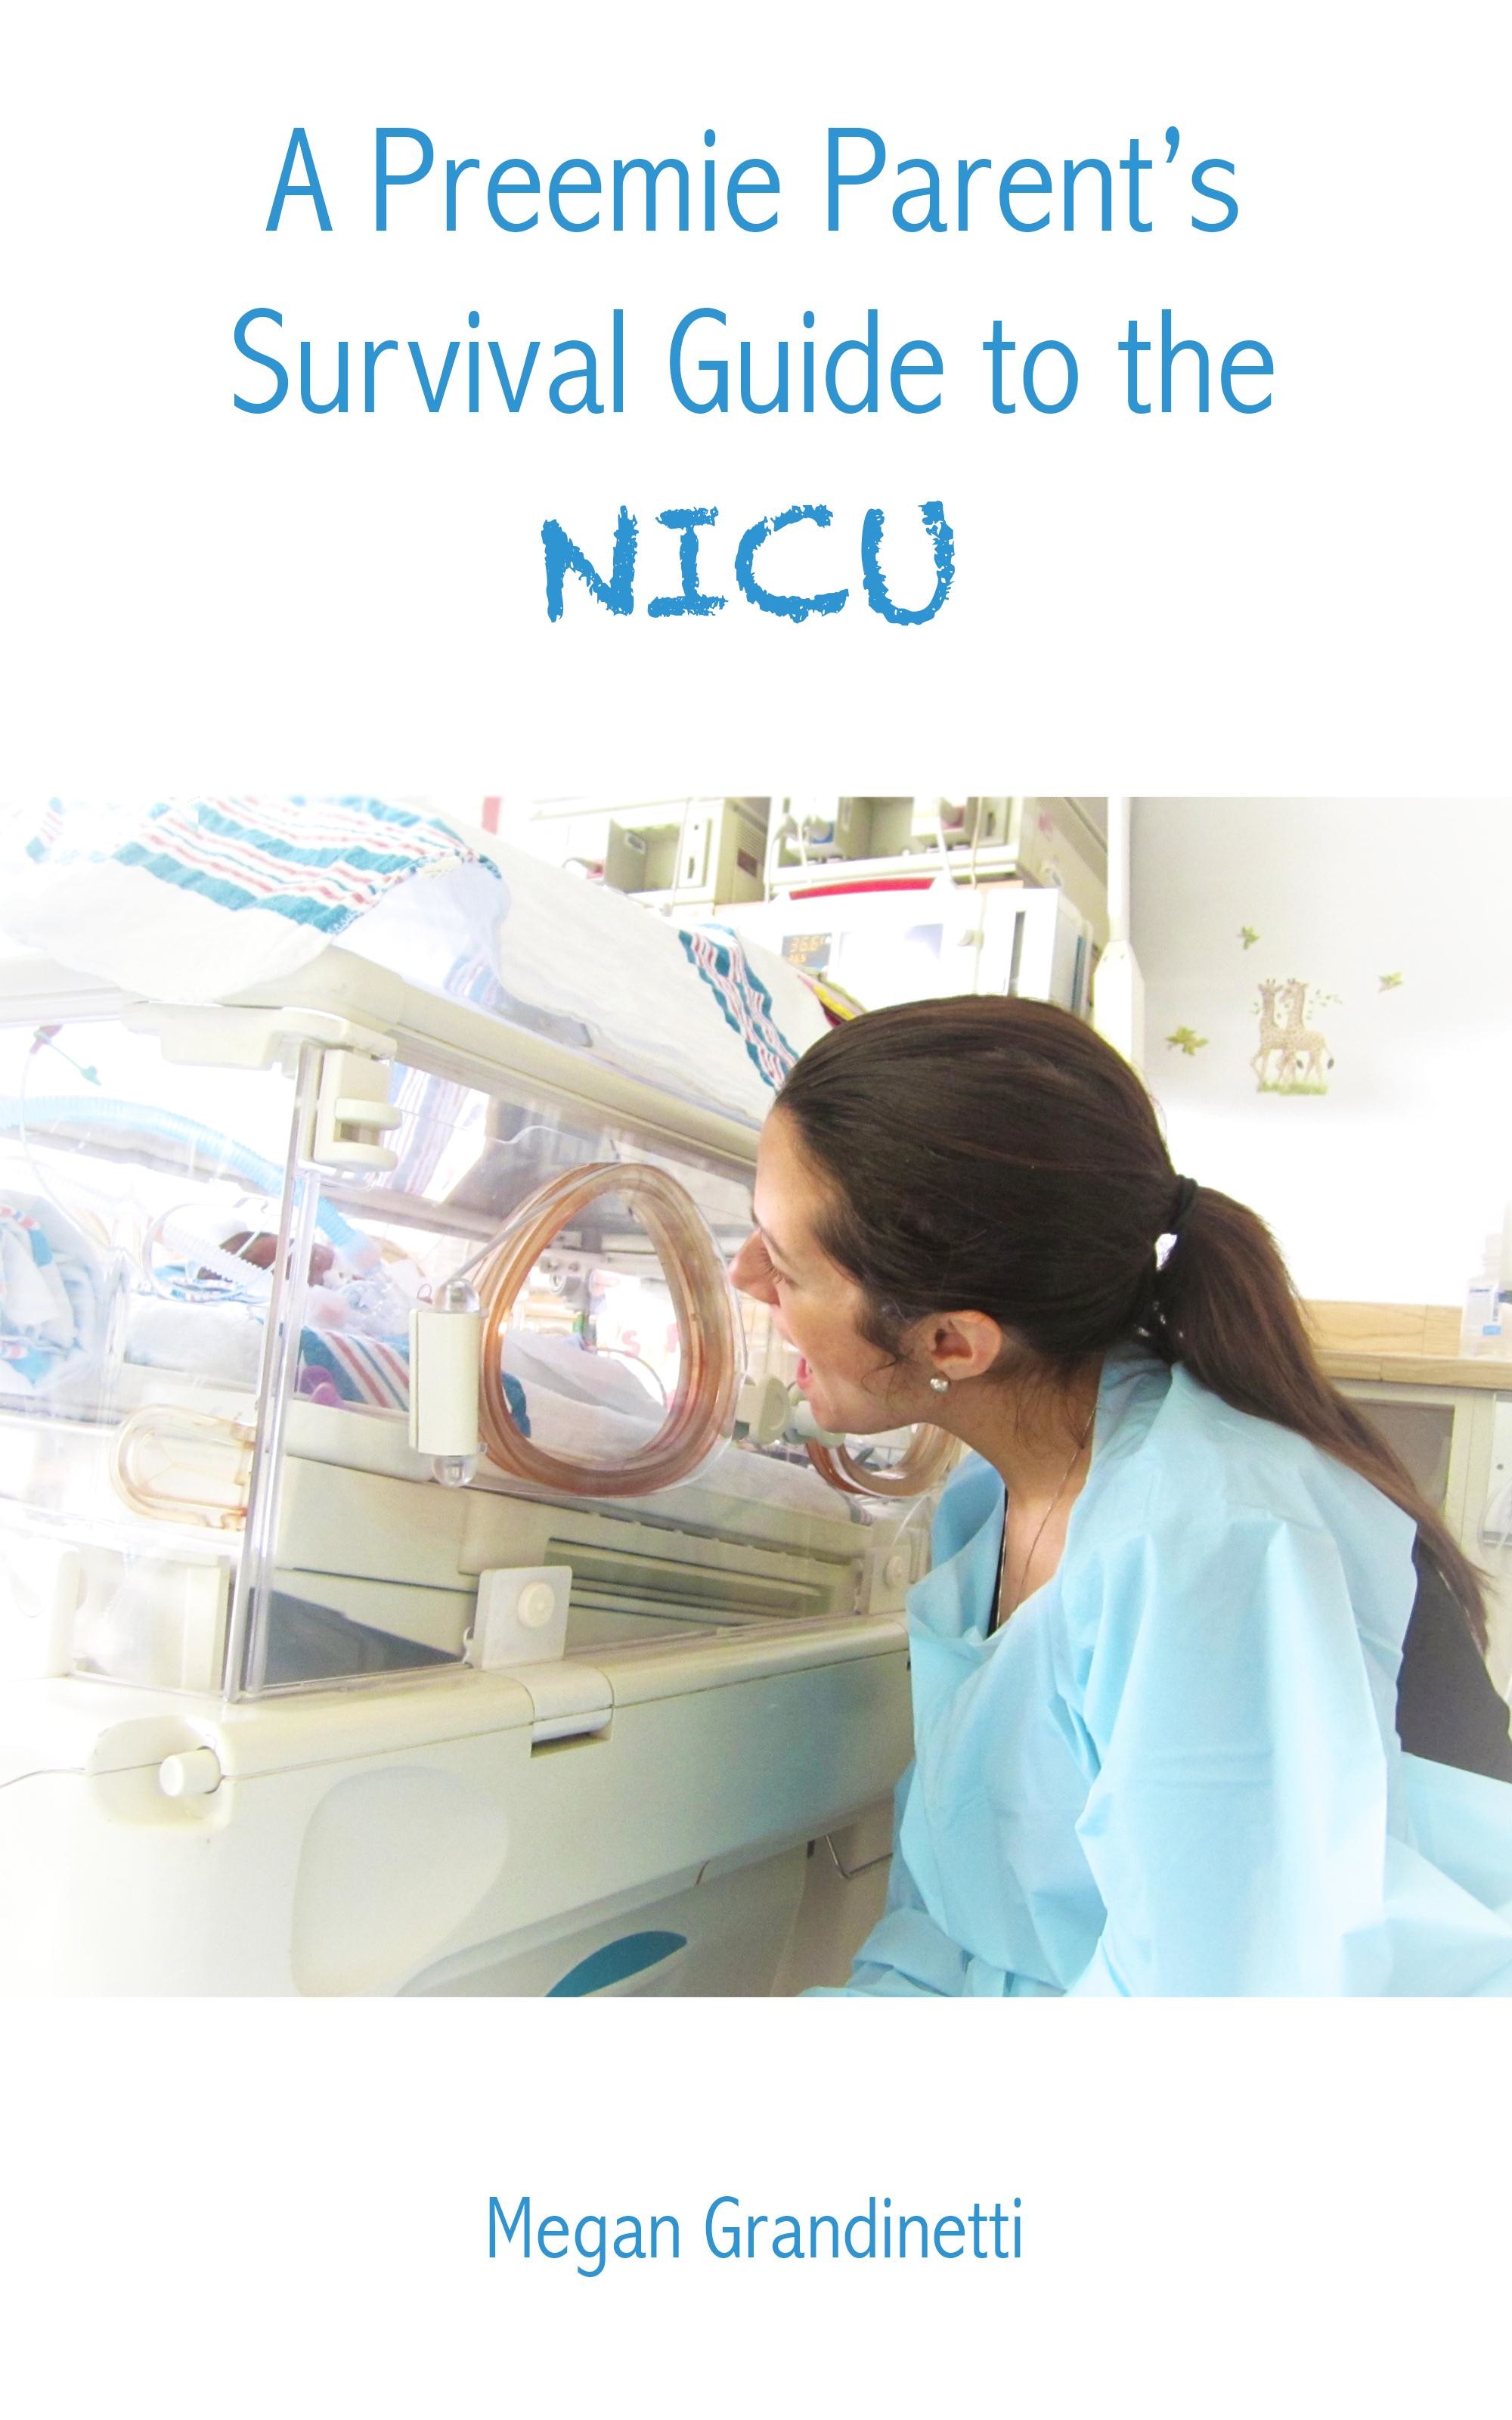 A Preemie Parent's Survival Guide to the NICU